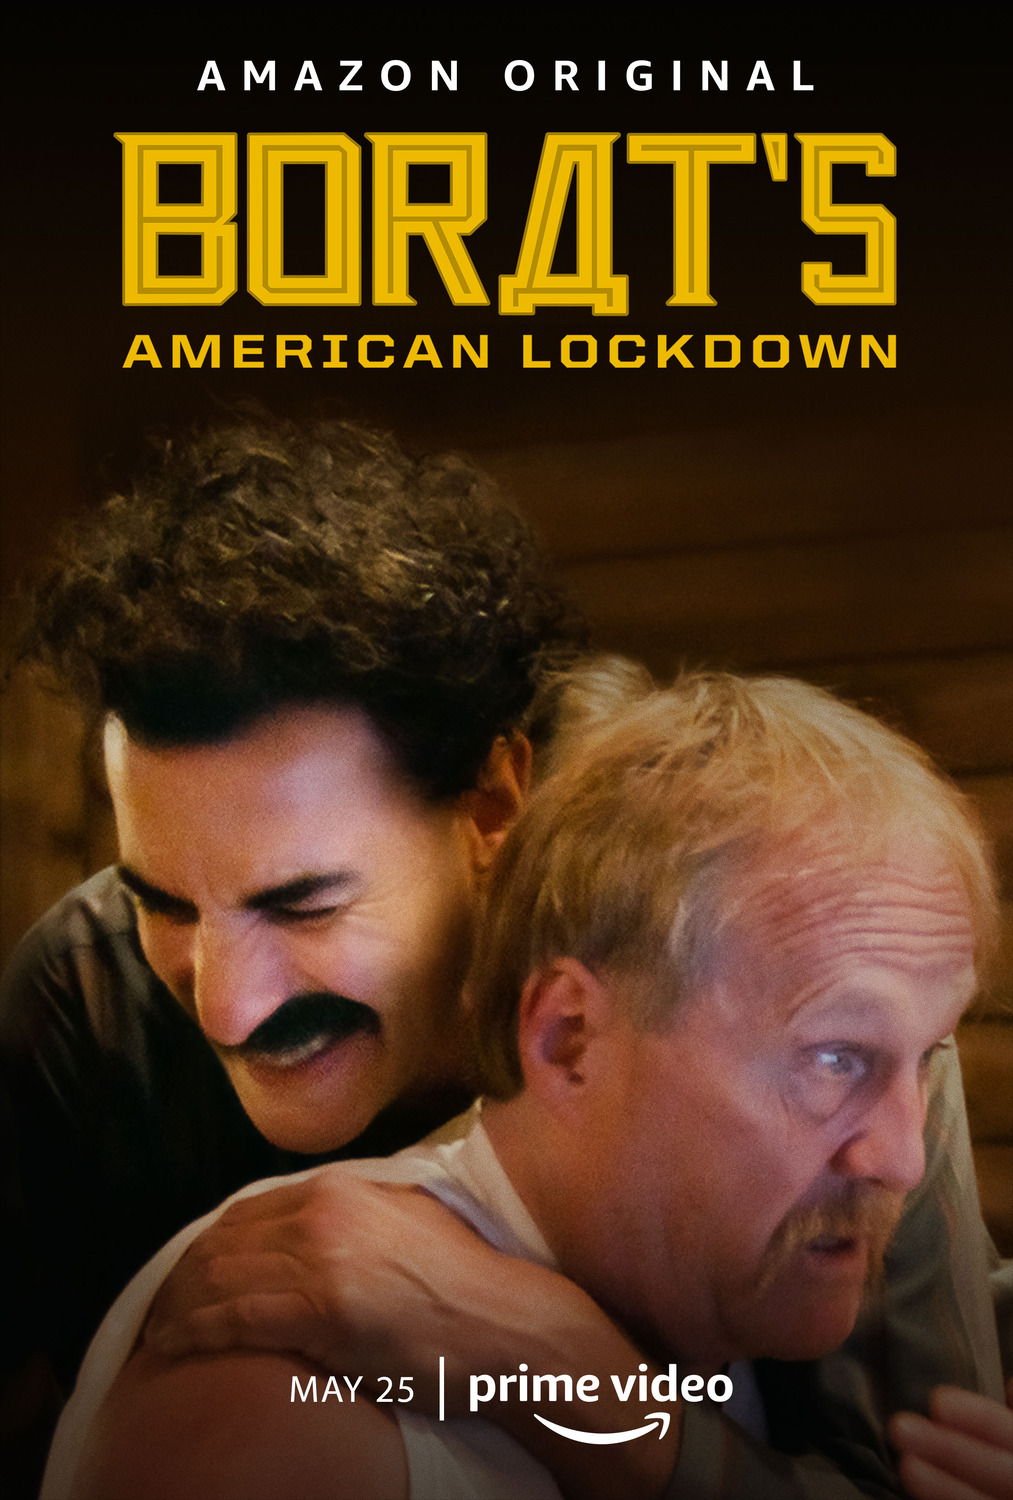 Extra Large Movie Poster Image for Borat Supplemental Reportings Retrieved from Floor of Stable Containing Editing (#2 of 3)